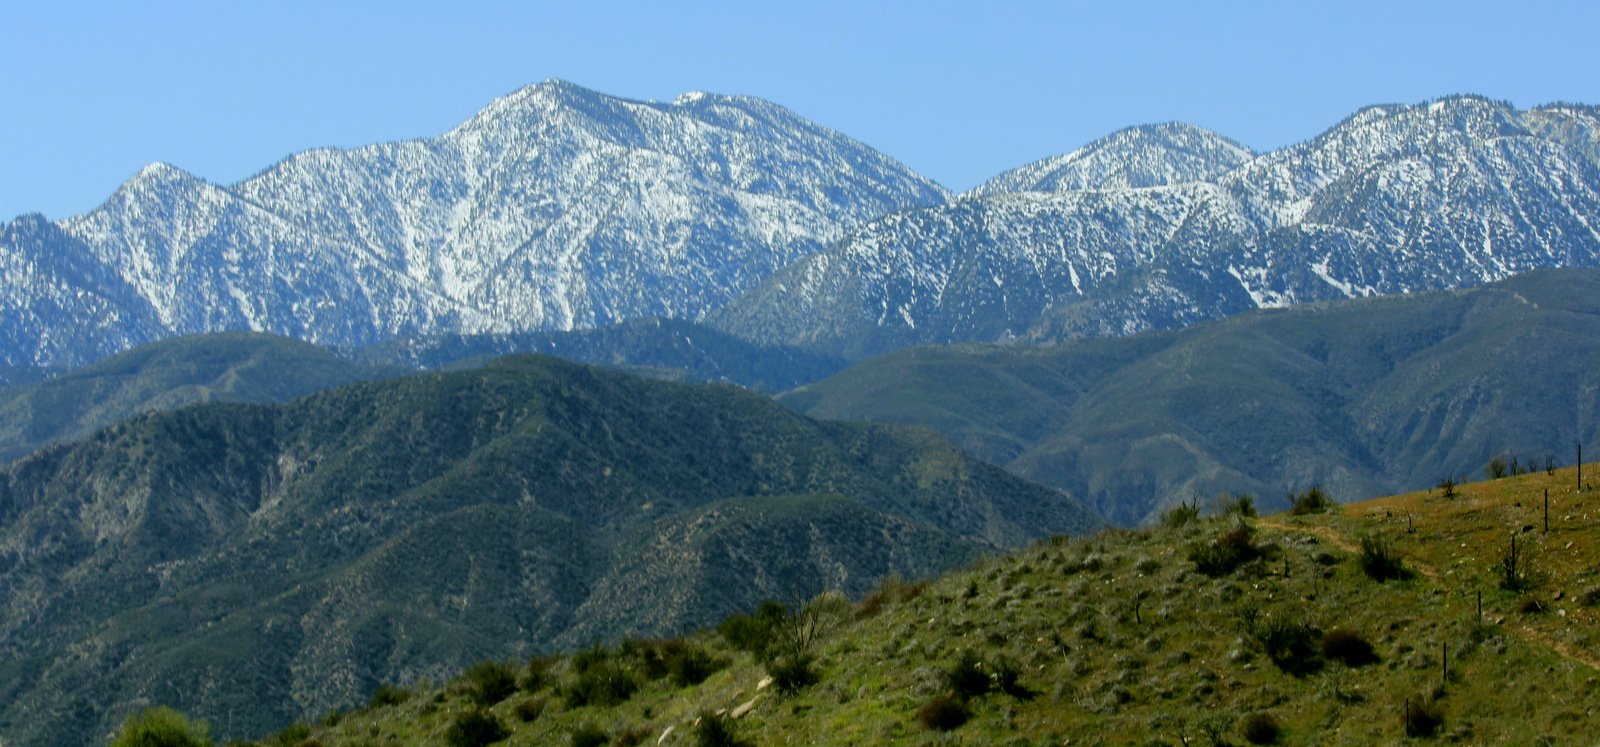 View of the San Gabriel Mountains from Cajon Pass. (Photo: Wikimedia Commons)